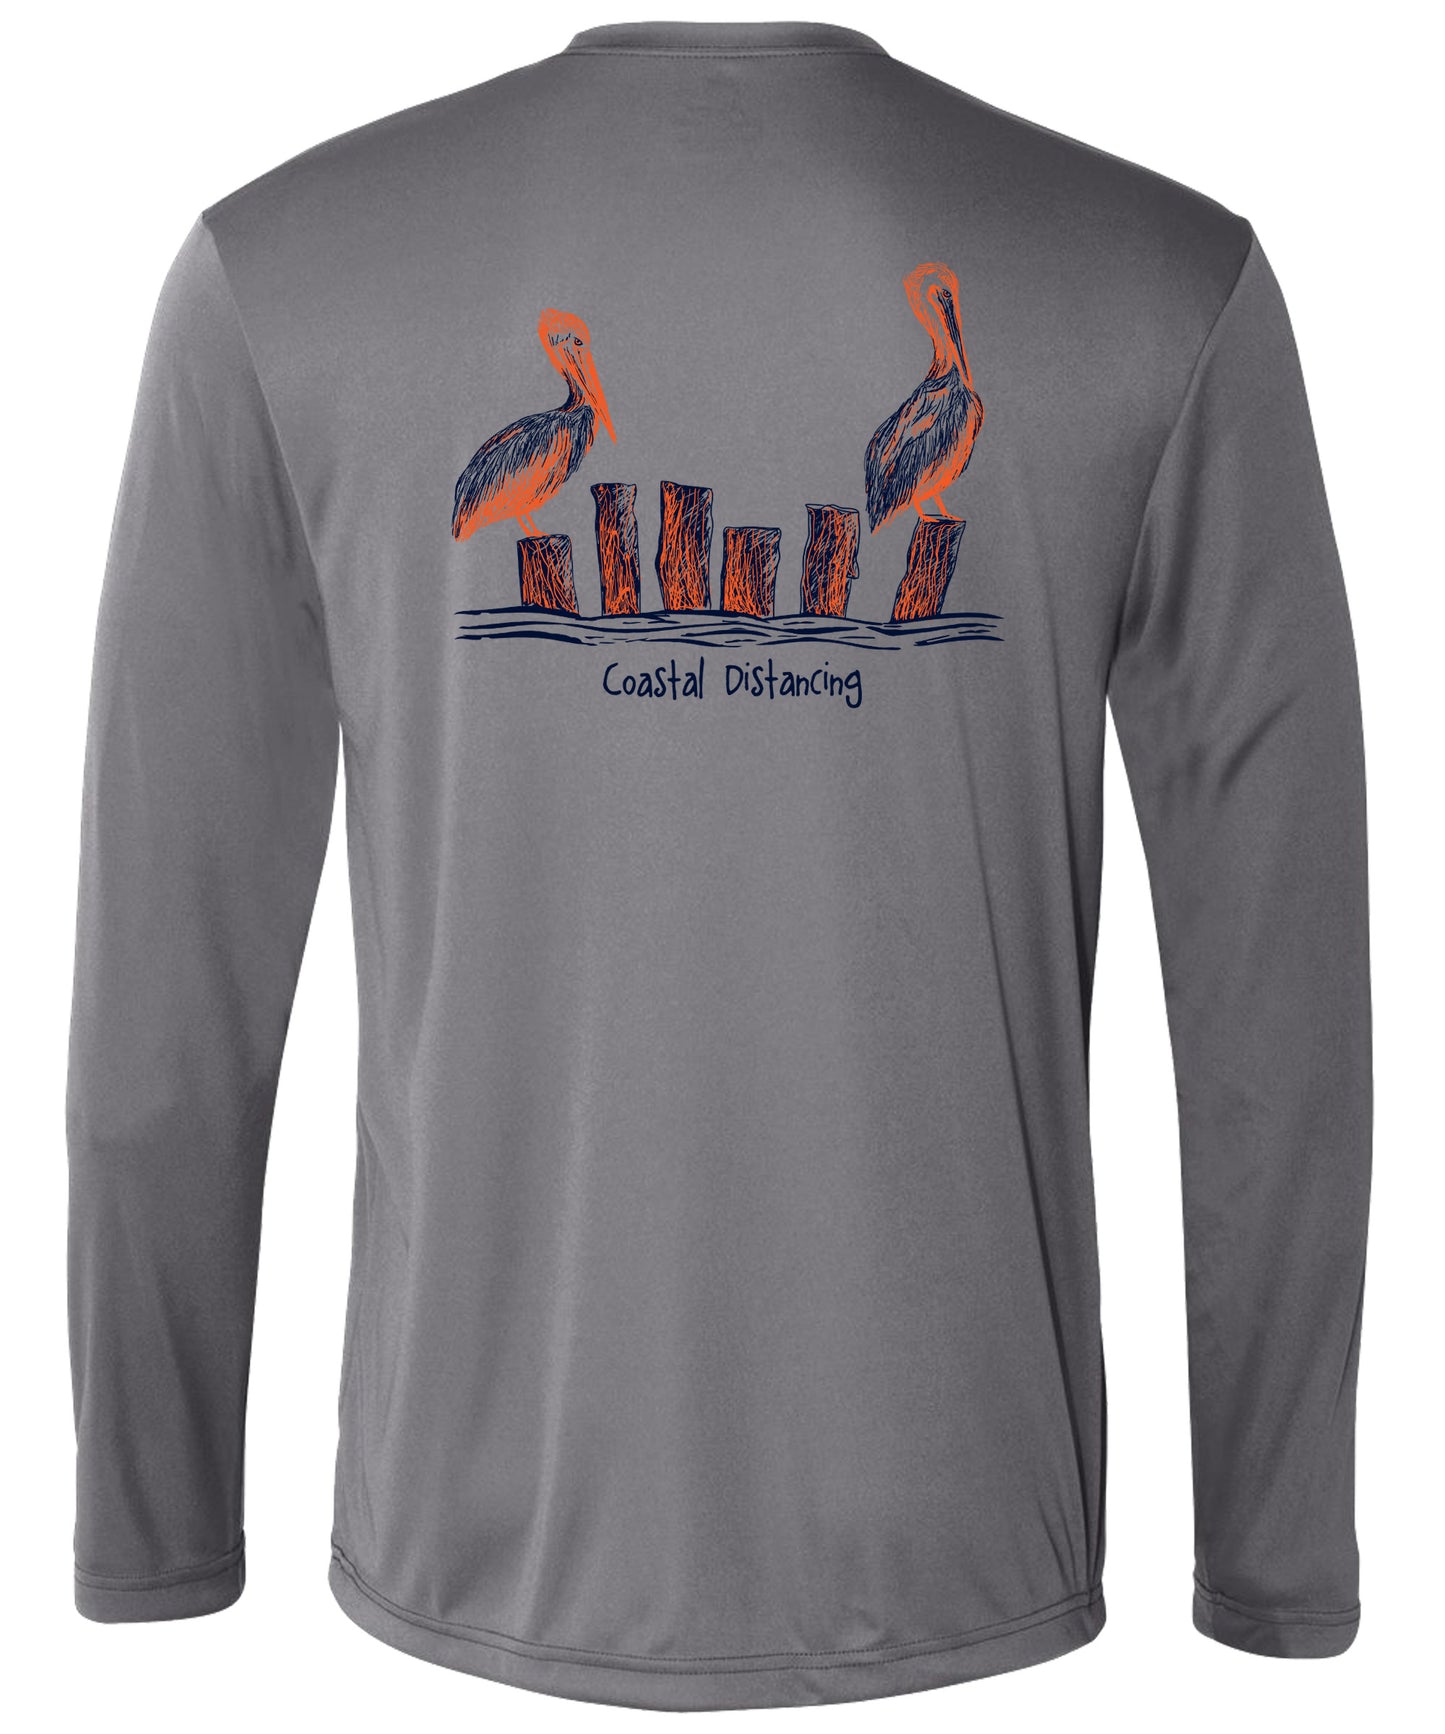 Pelicans Coastal Distancing Performance Dry-fit Gray Long Sleeve Shirts